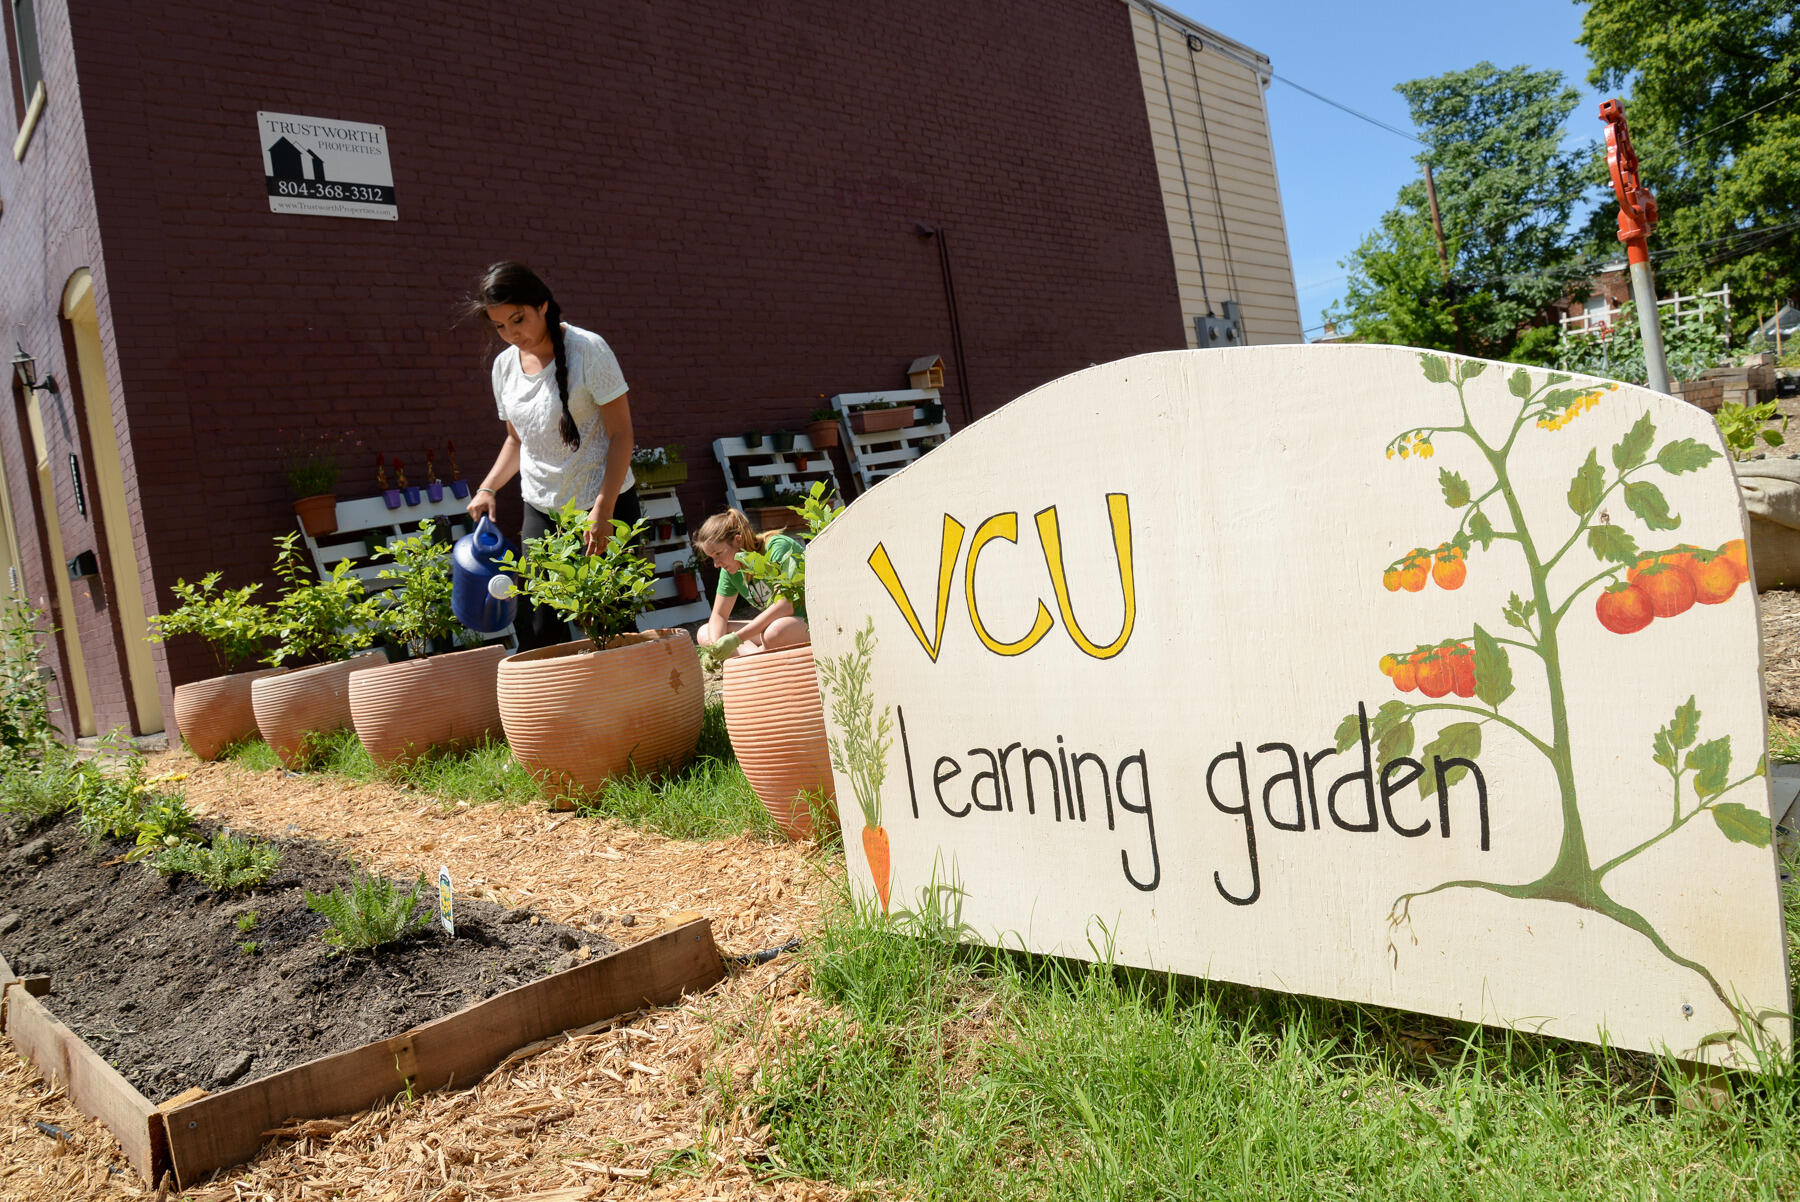 Students tend to plants at the Monroe Park Campus Learning Garden.
<br>Photo by Pat Kane, University Public Affairs